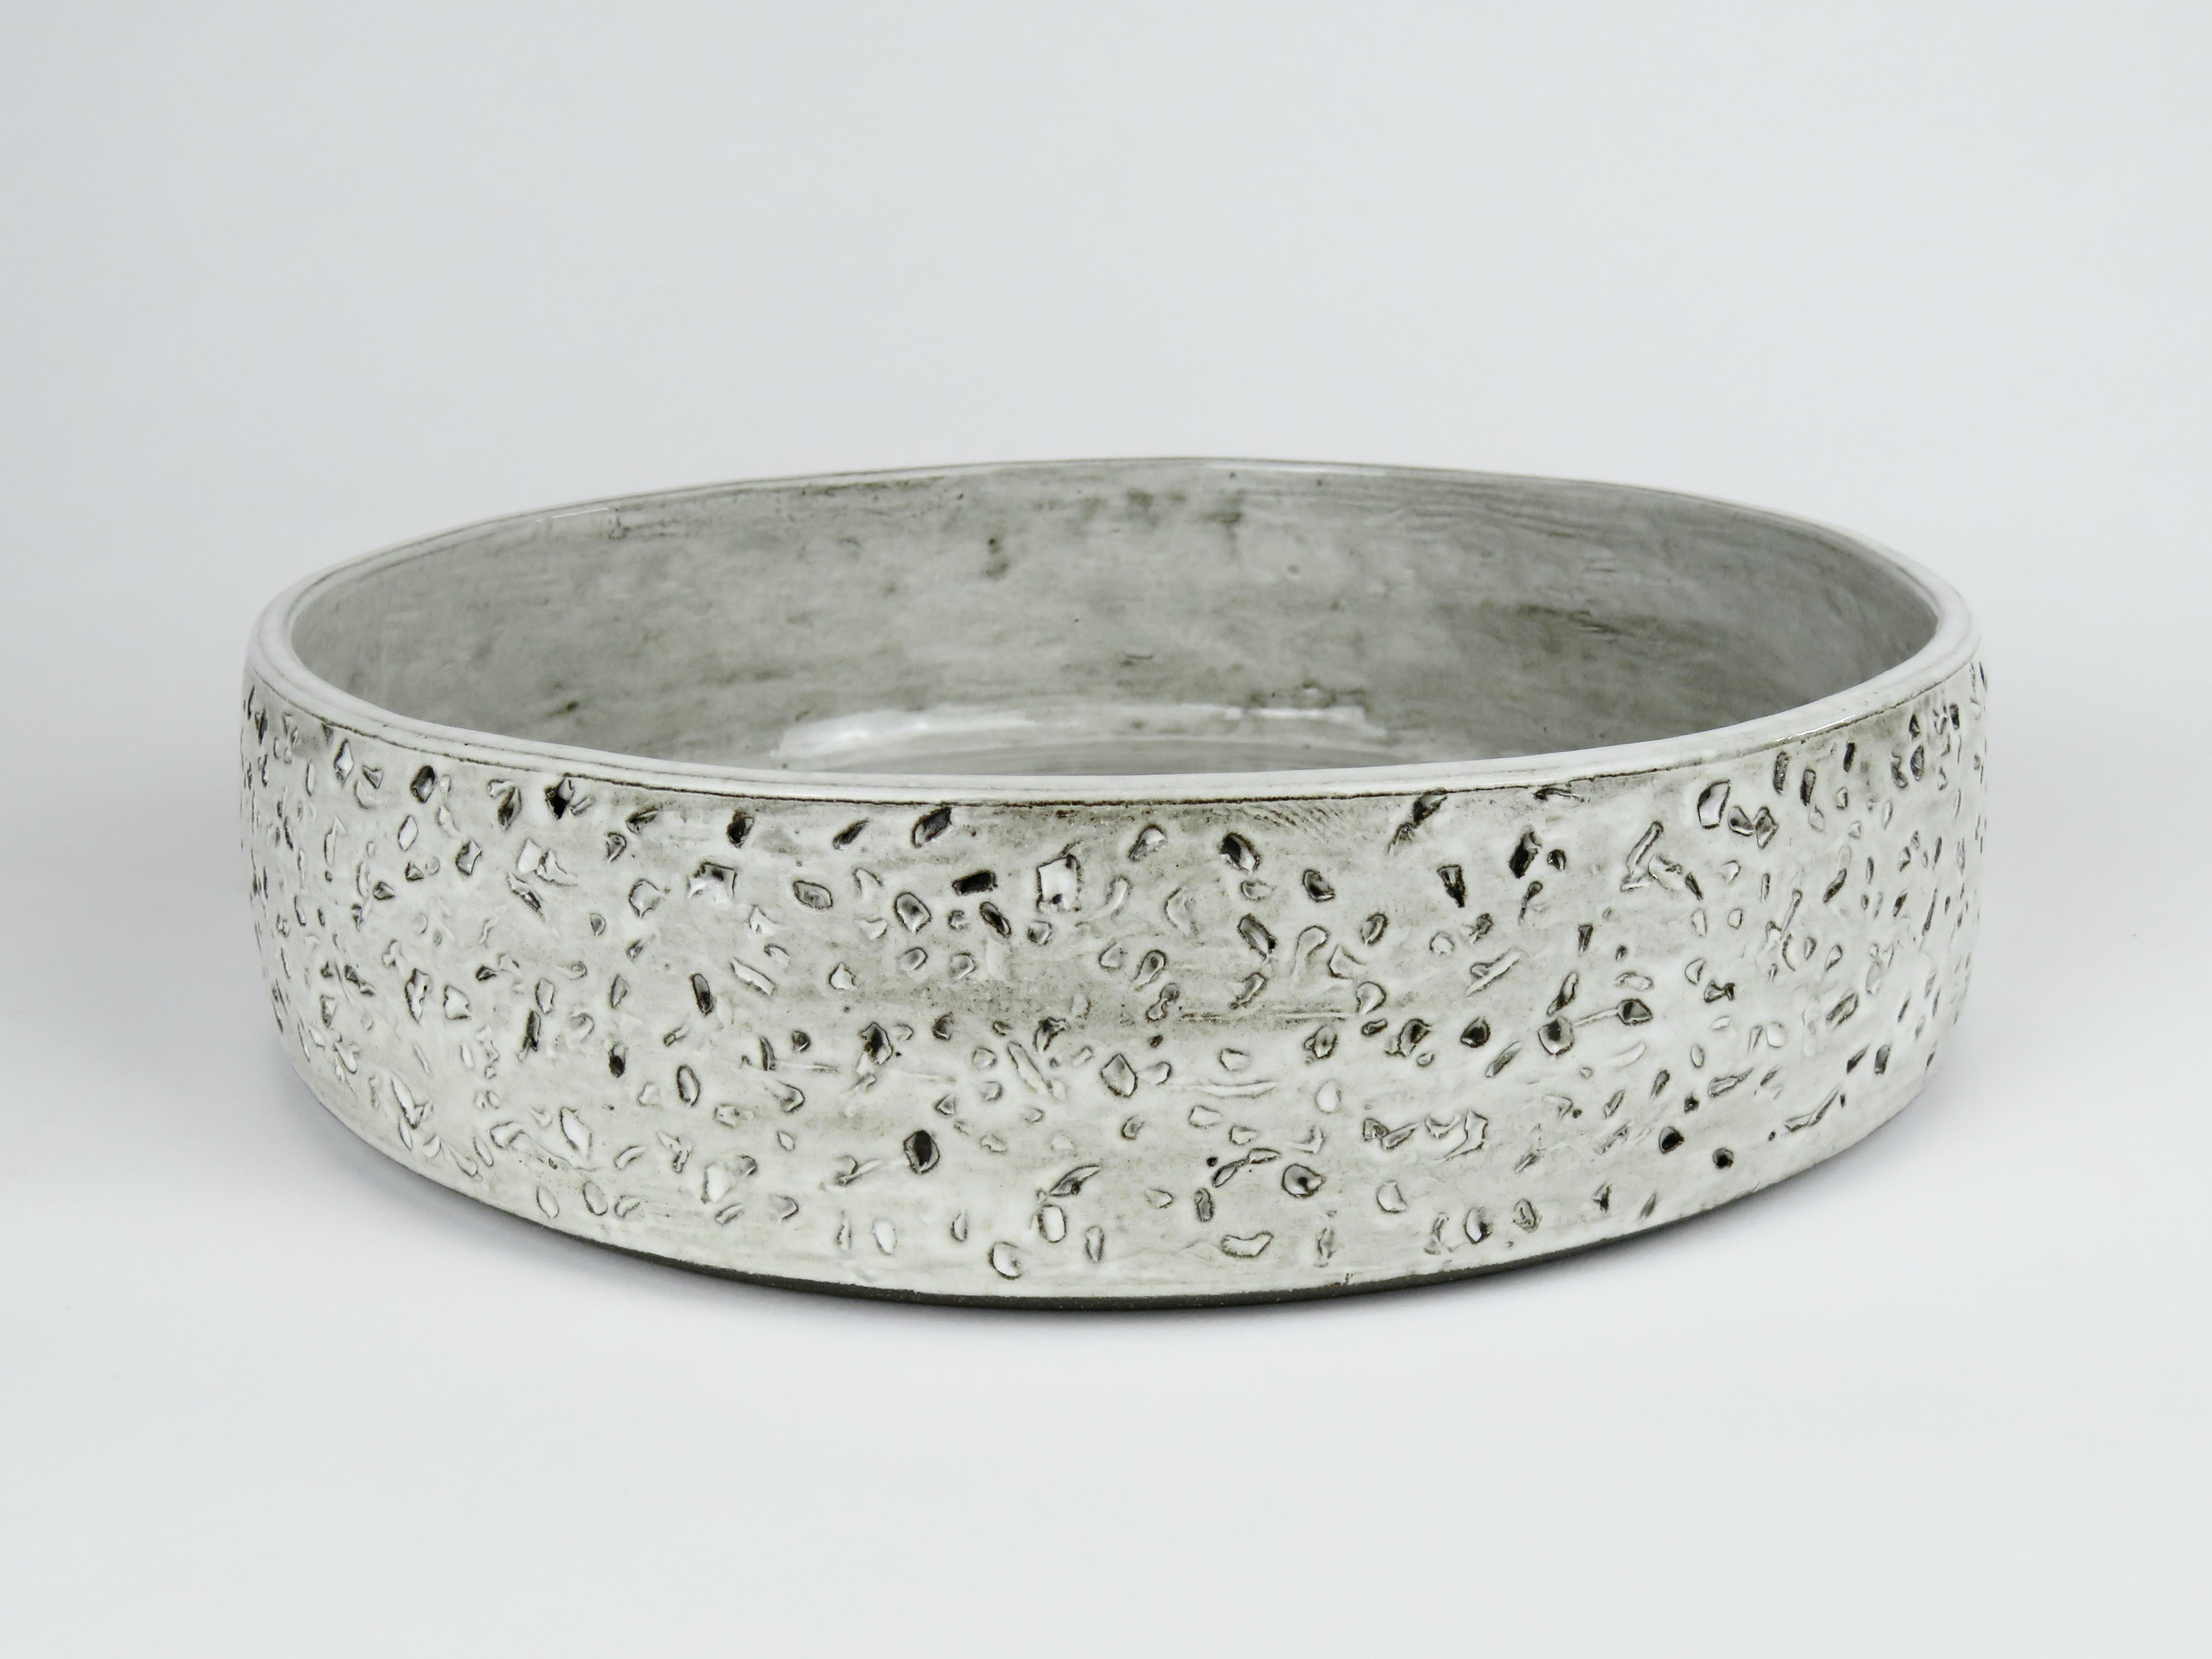 American Large Flat Serving Bowl, Hand Carved Exterior In Off-White Glaze, Ceramic For Sale